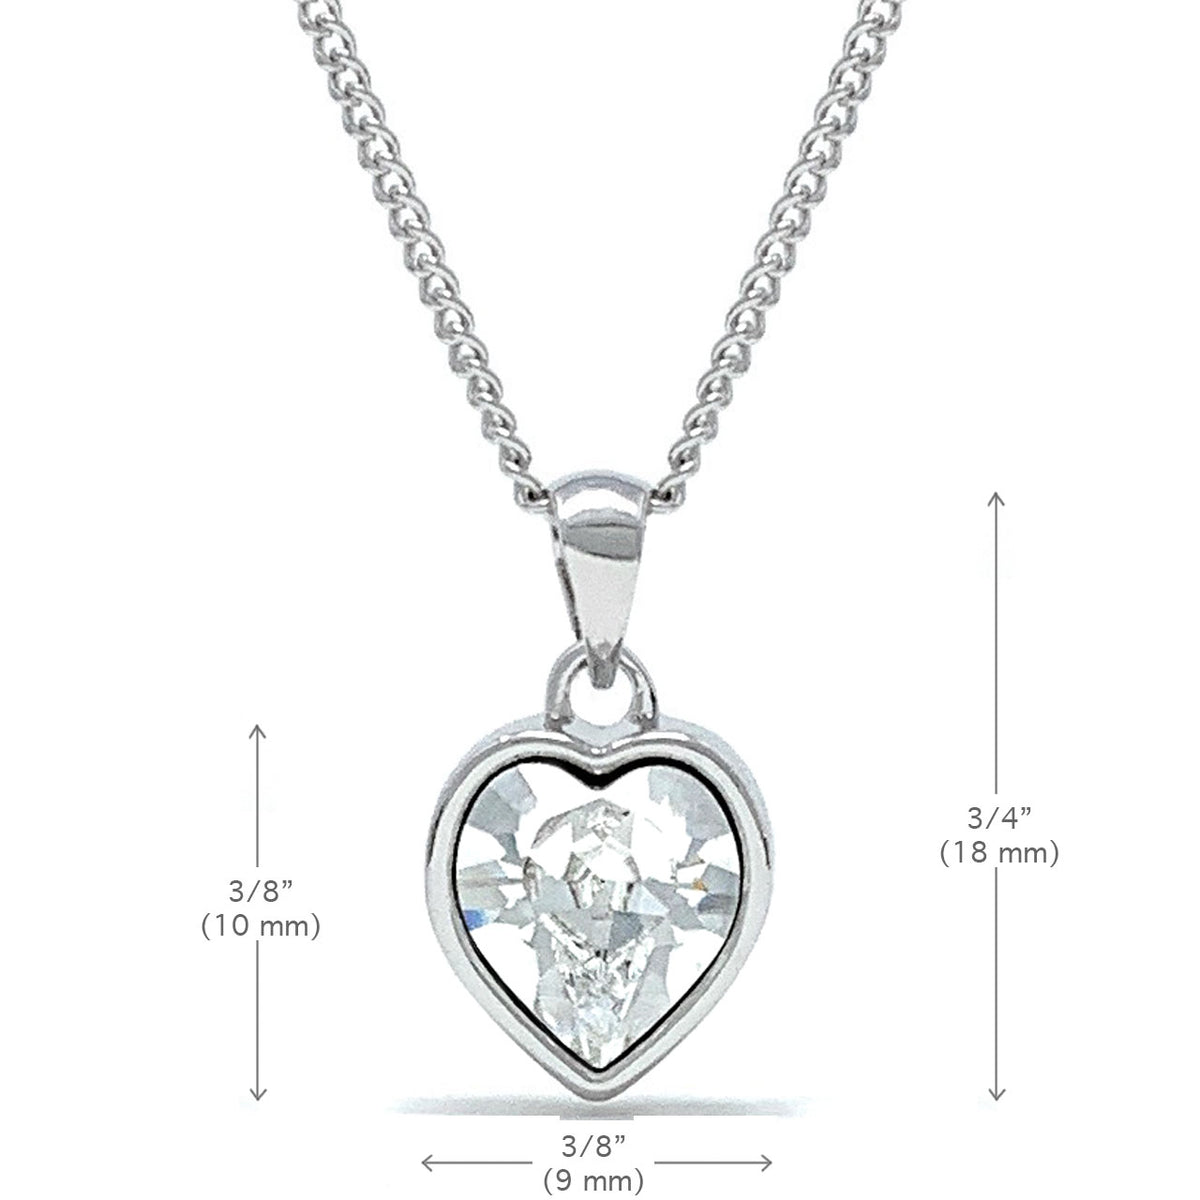 Lucia Pendant Necklace with White Clear Heart Crystals from Swarovski Silver Toned Rhodium Plated - Ed Heart